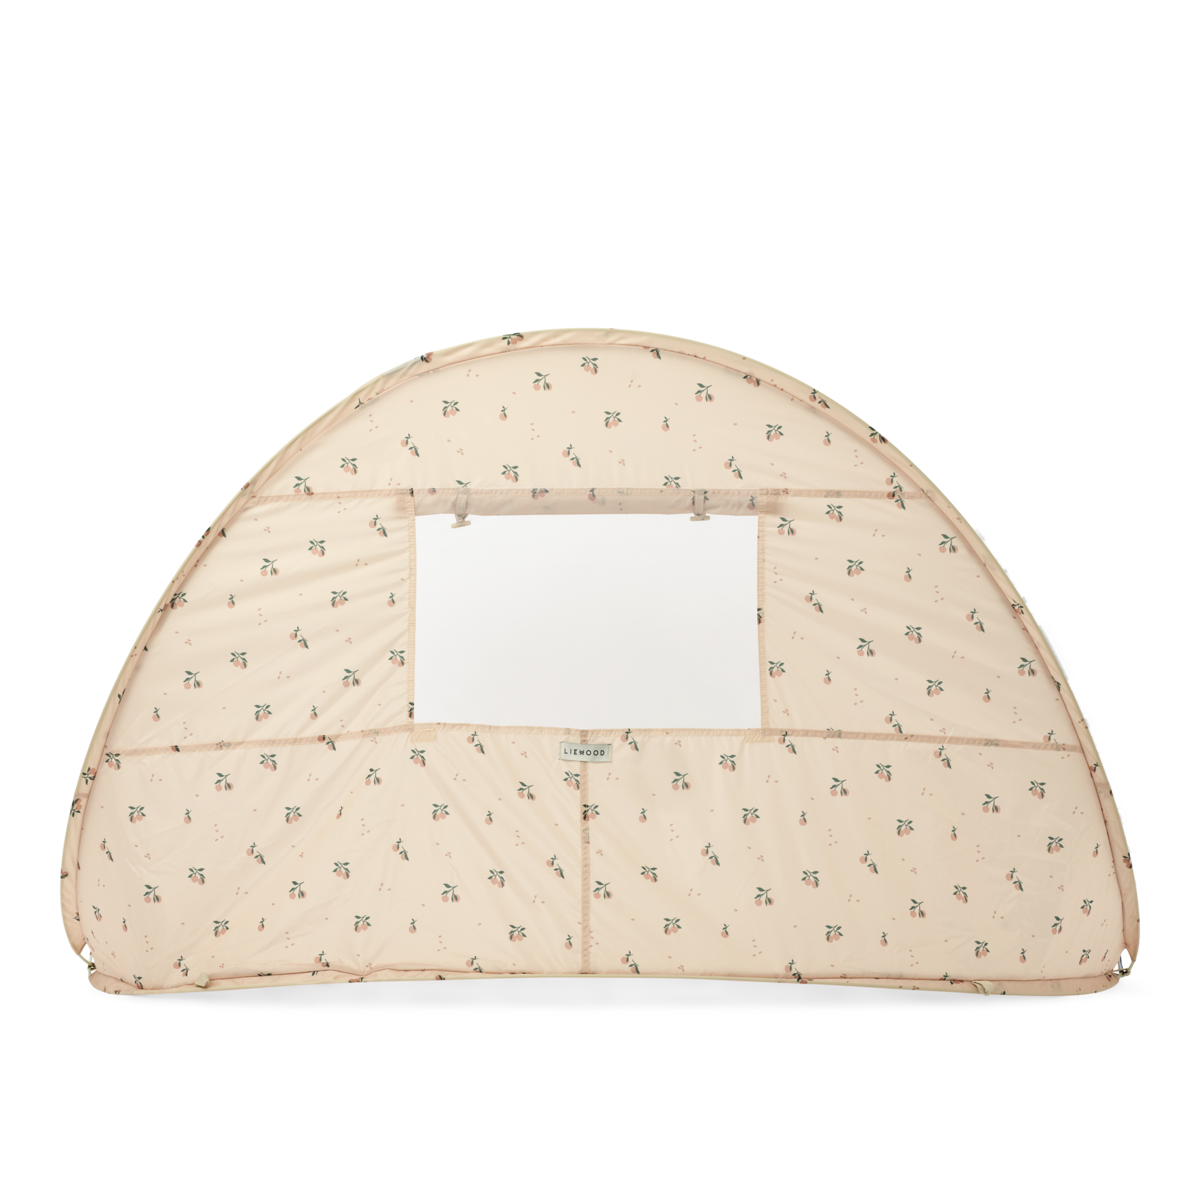 Liewood Liewood Cassie Pop Up Tent - Peach / Sea shell - Decomusy